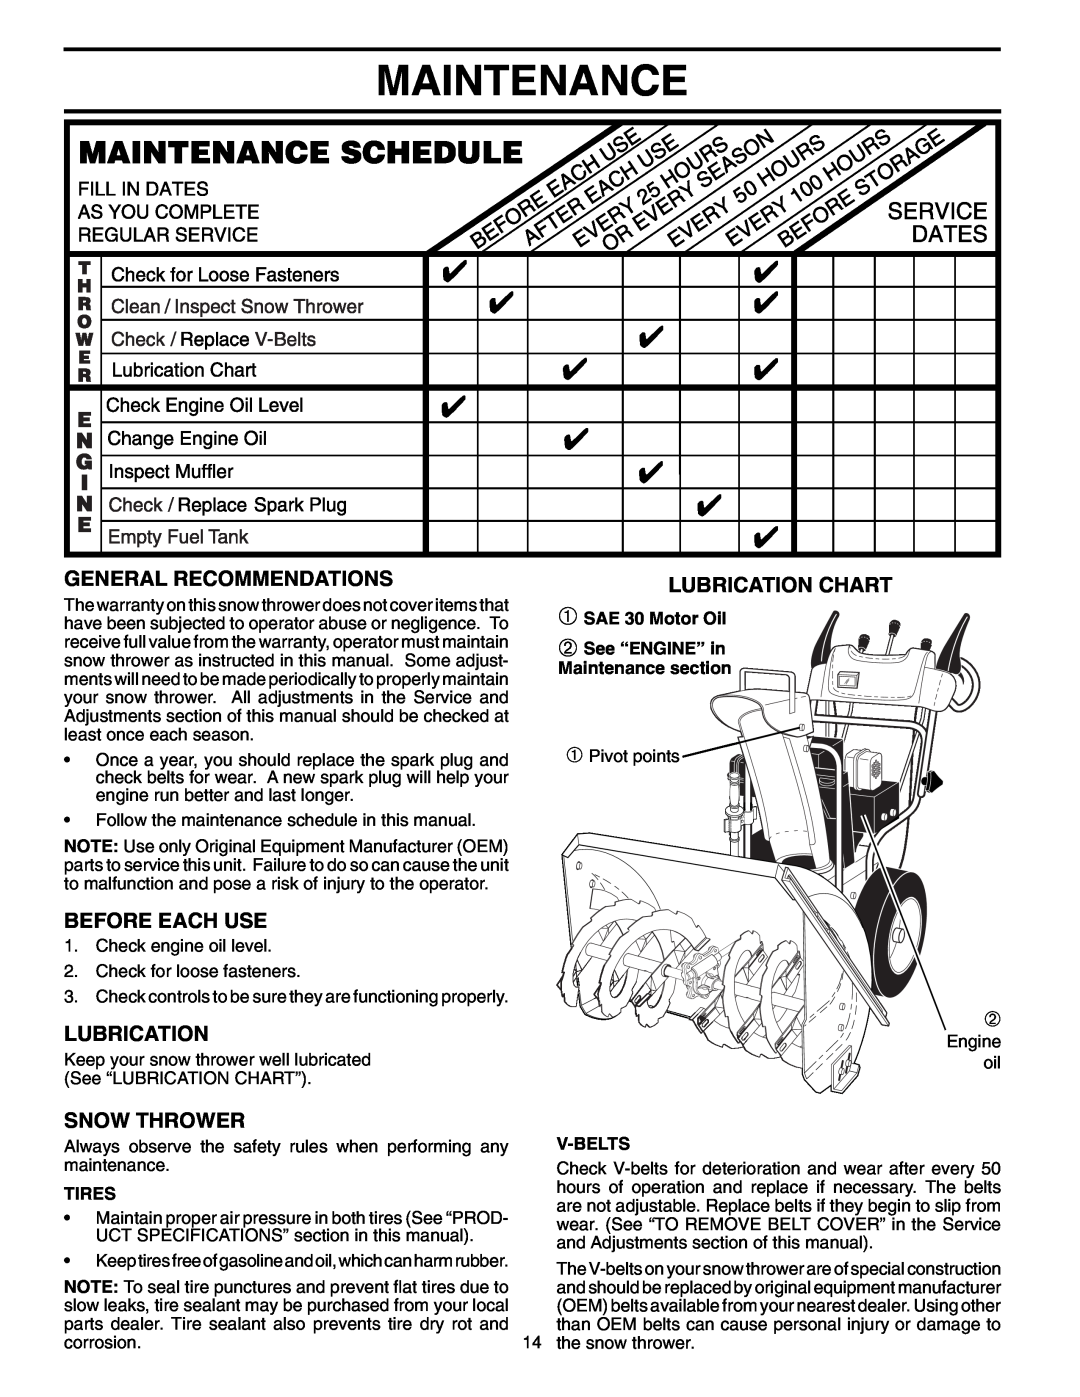 Poulan PP1130ES Maintenance, General Recommendations, Before Each Use, Lubrication Chart, Snow Thrower, Tires, V-Belts 